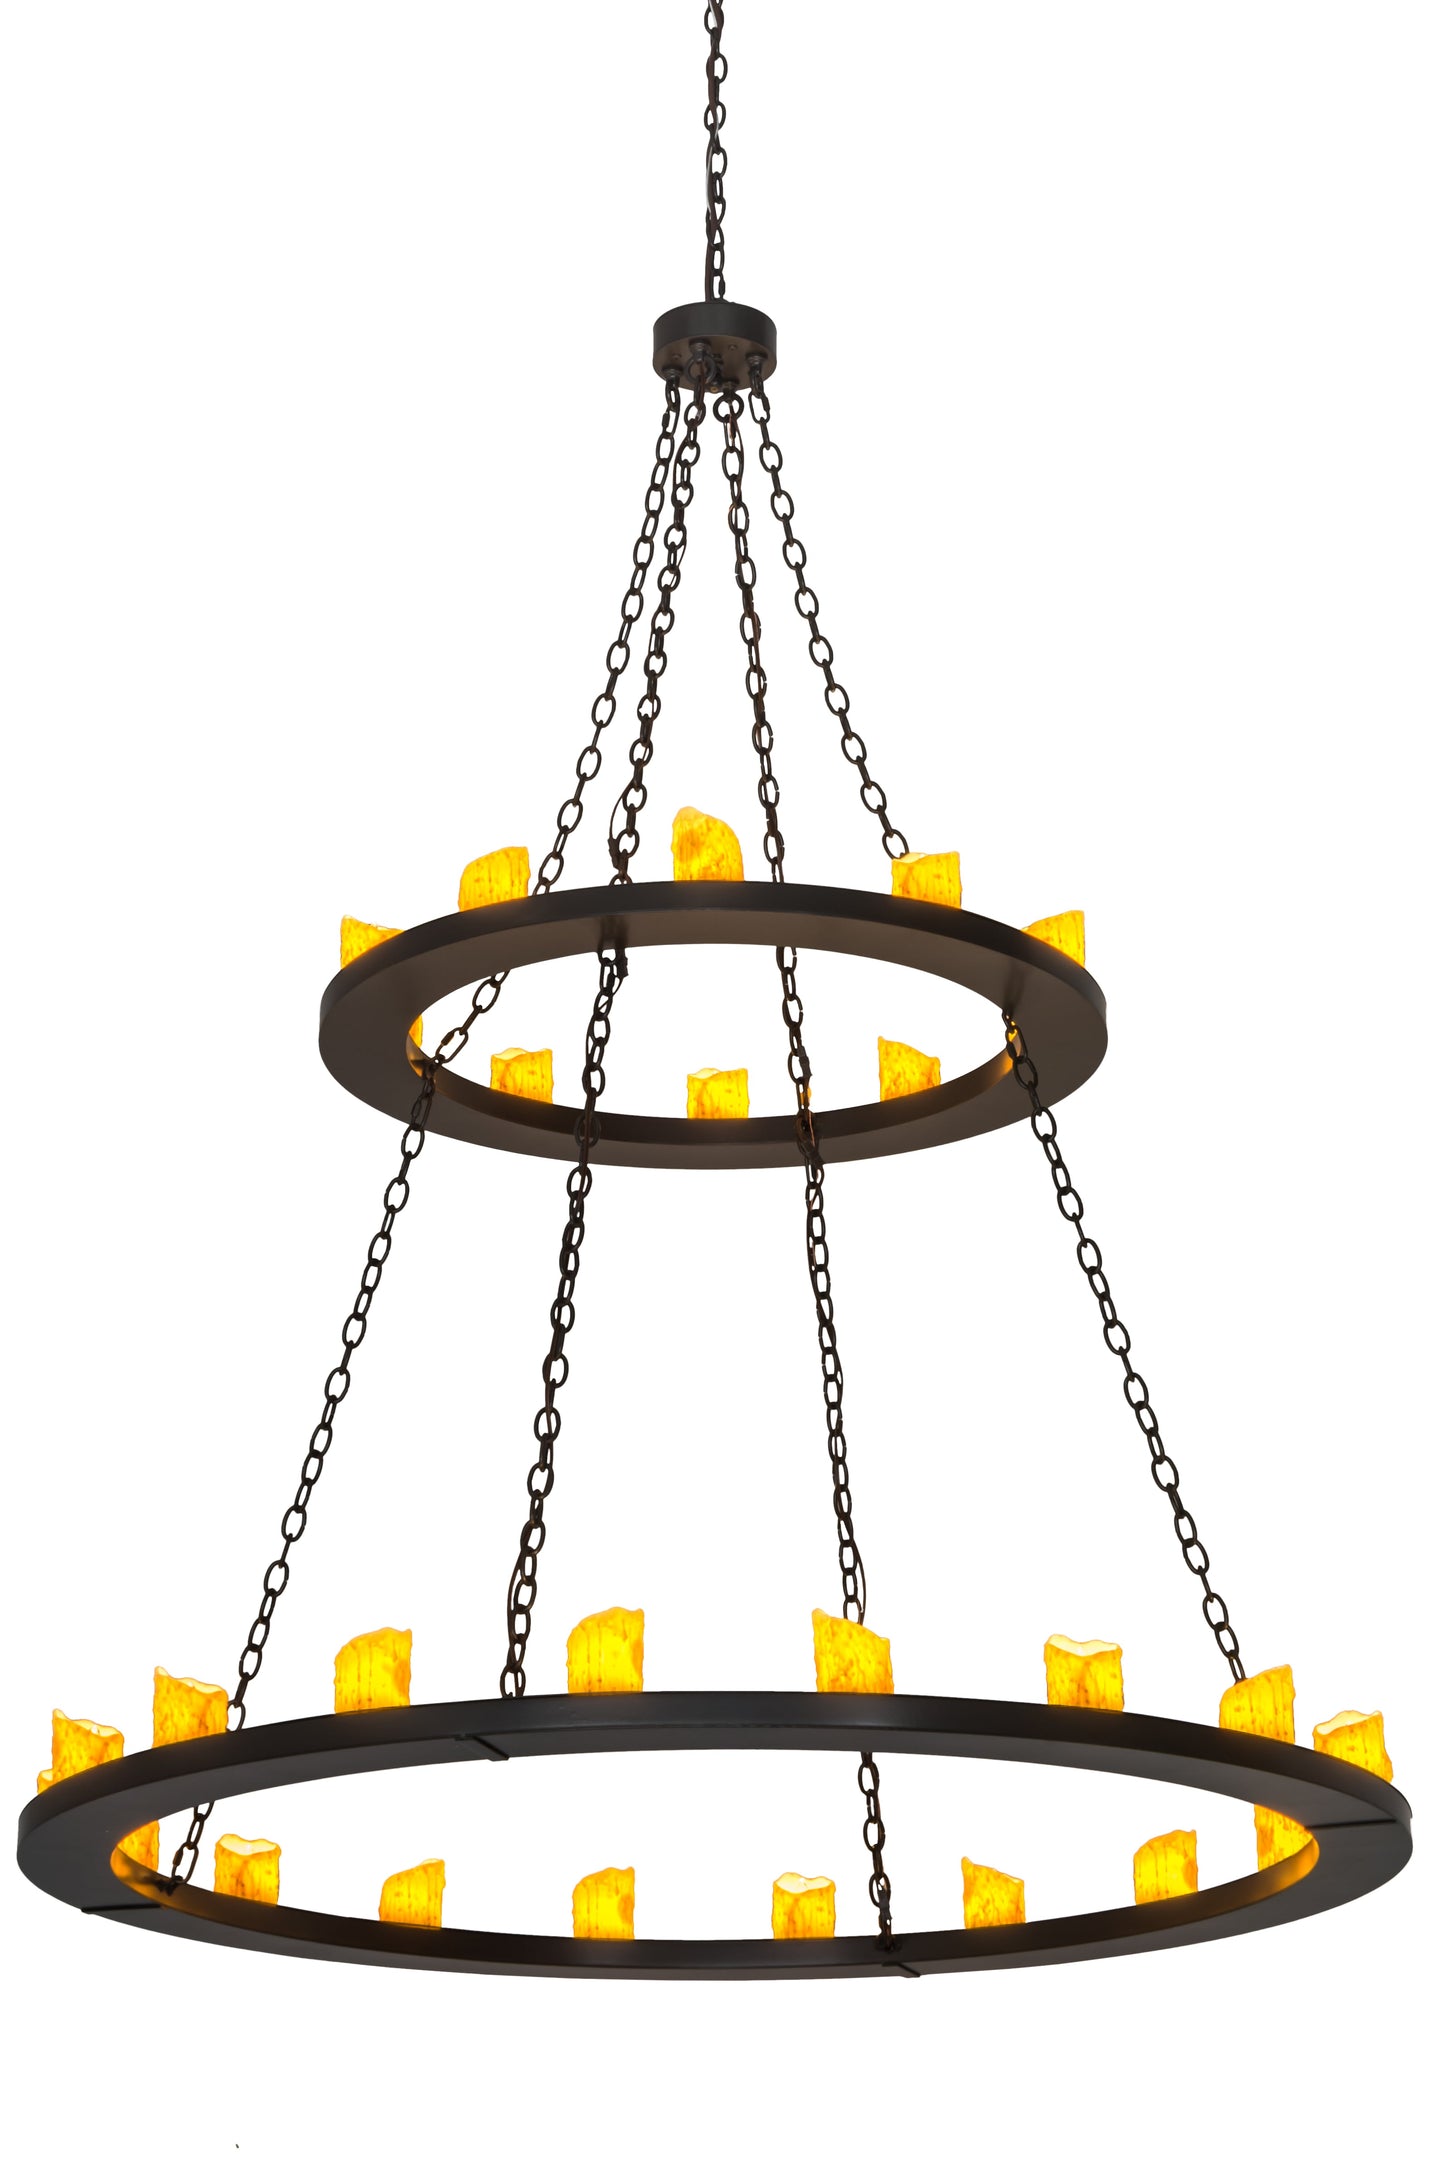 60" Loxley 28-Light Two Tier Chandelier by 2nd Ave Lighting